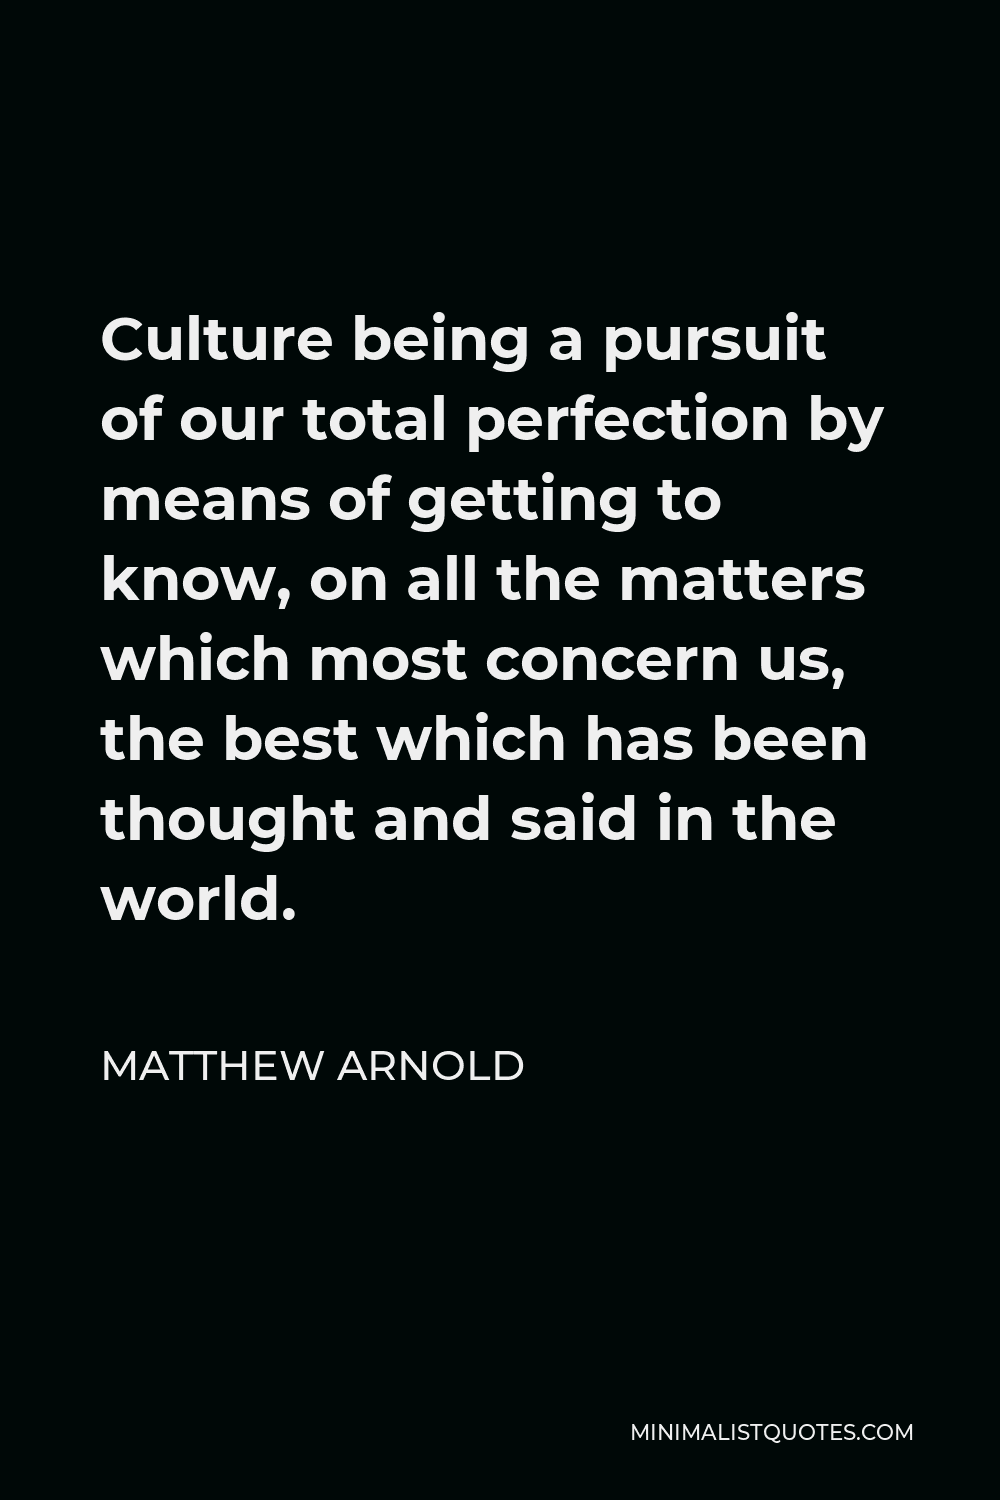 Matthew Arnold Quote - Culture being a pursuit of our total perfection by means of getting to know, on all the matters which most concern us, the best which has been thought and said in the world.